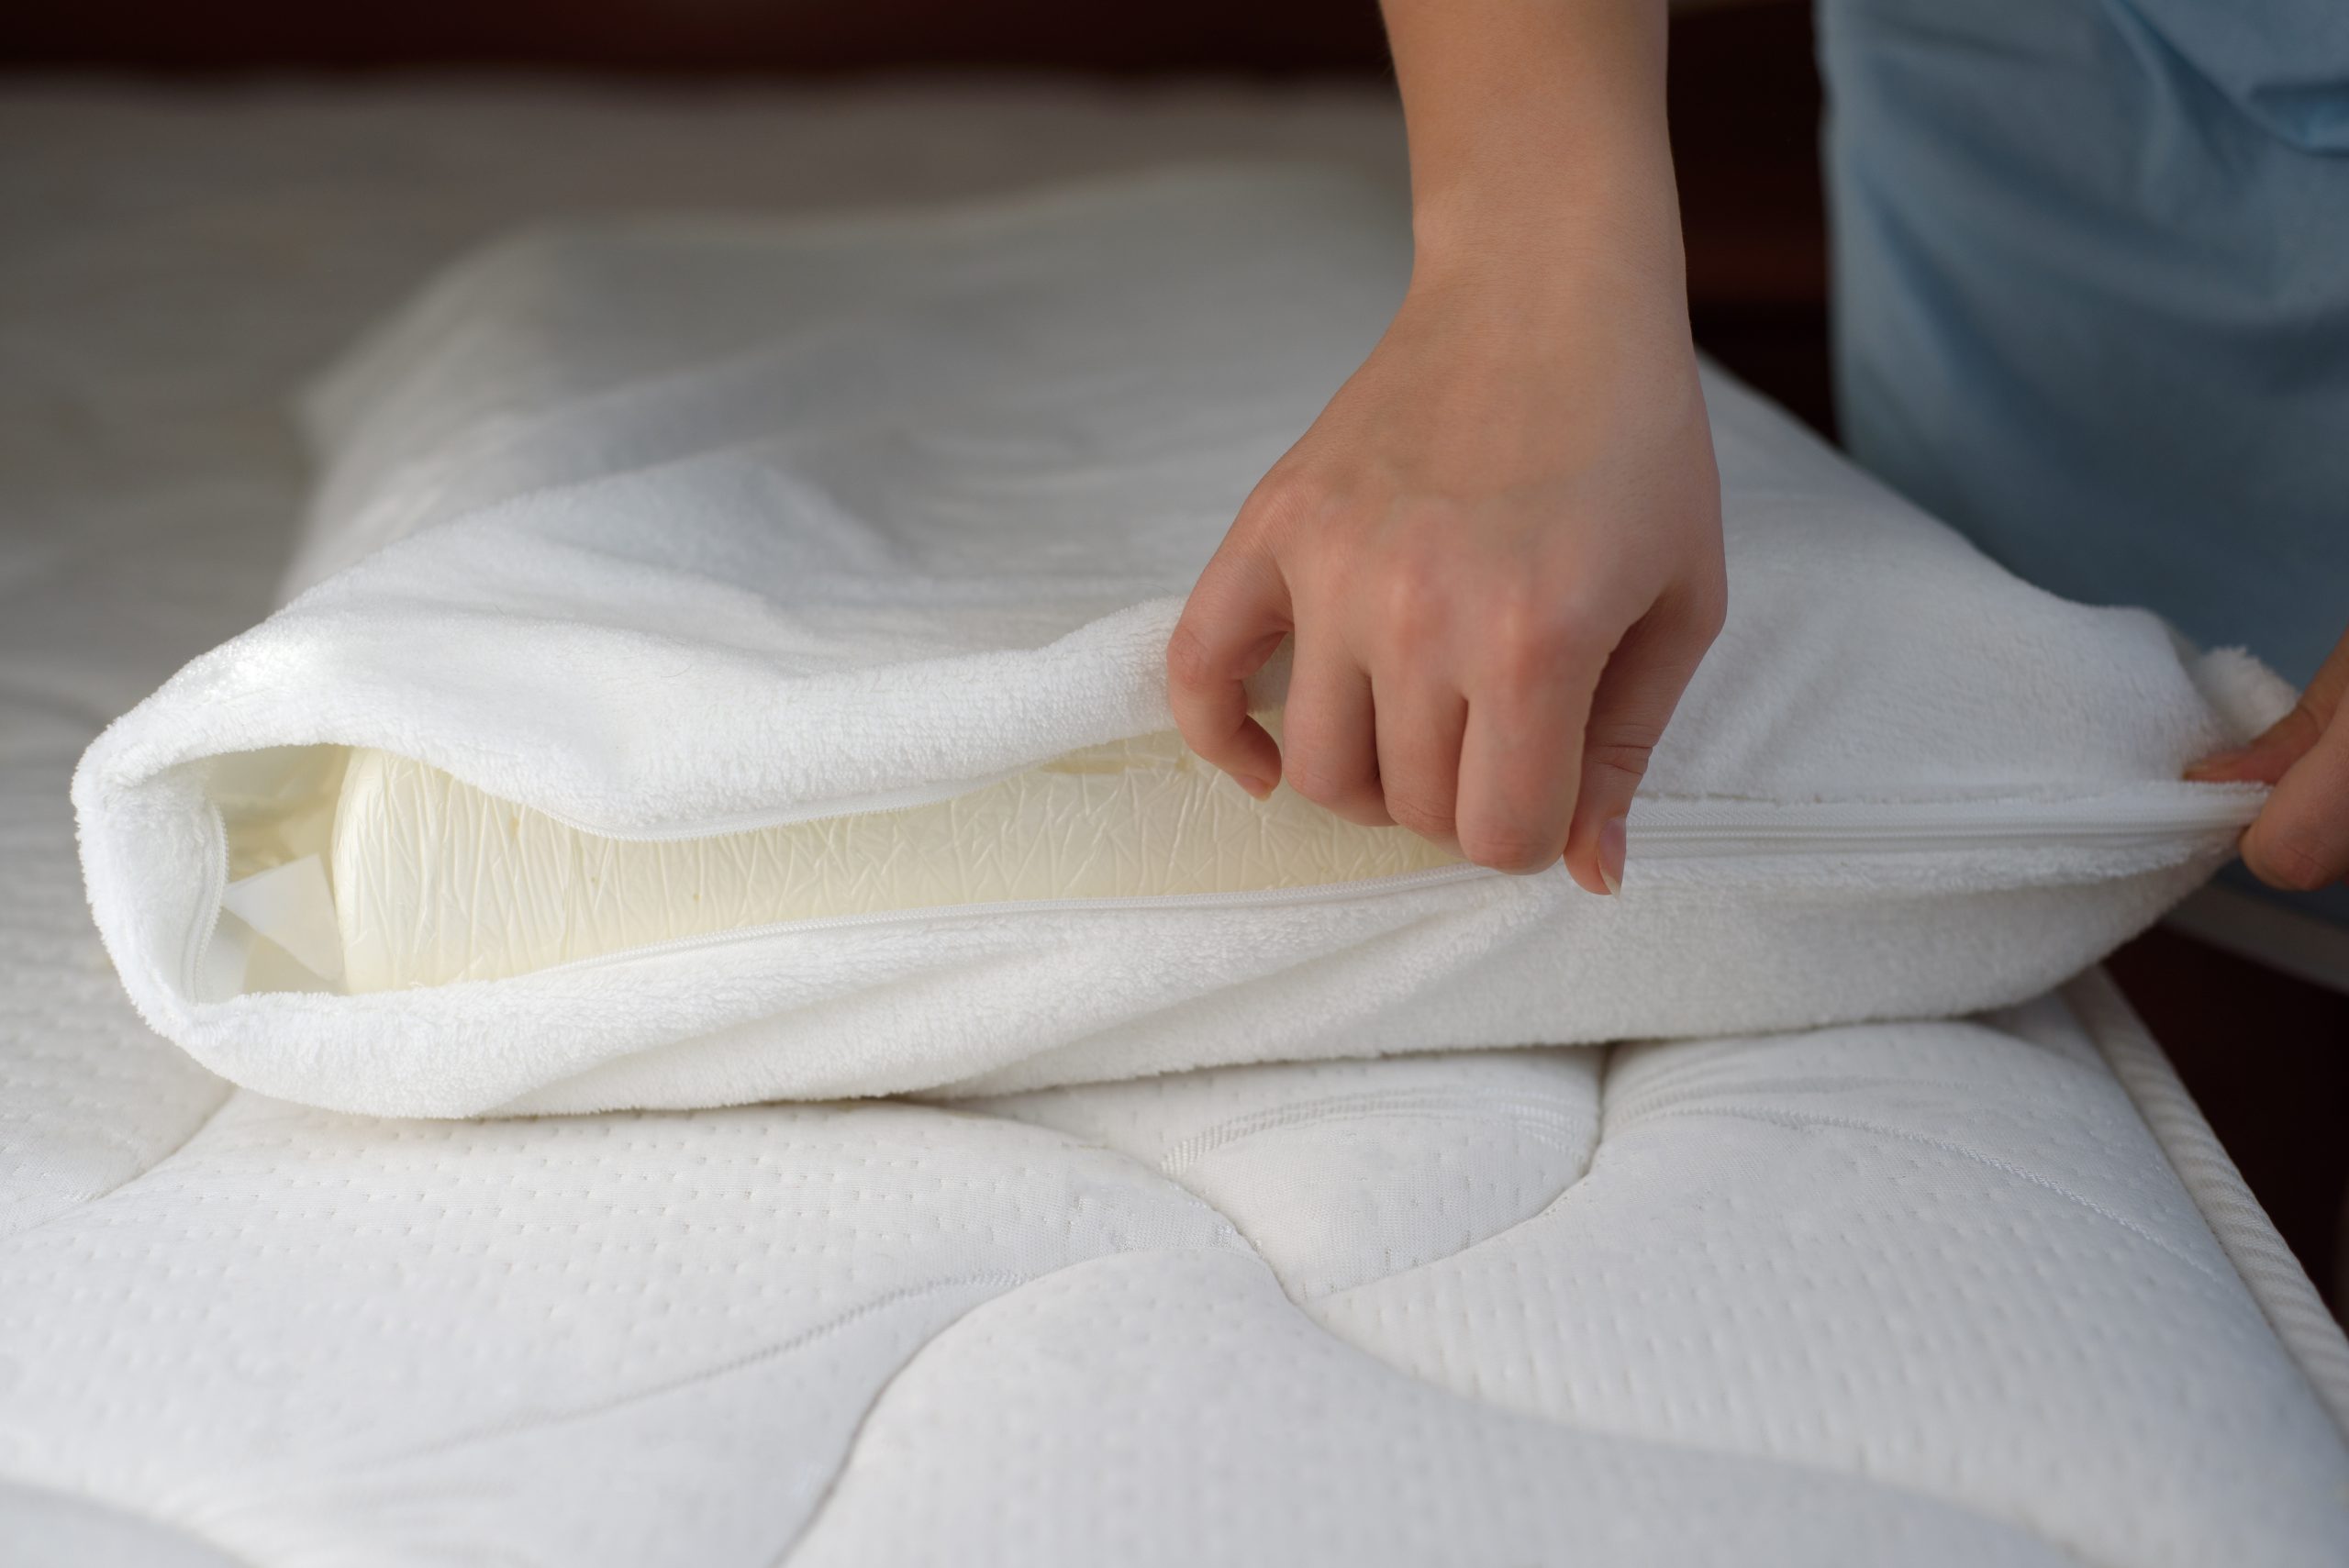 faq - birch - How does heat treatment for bed bugs work?